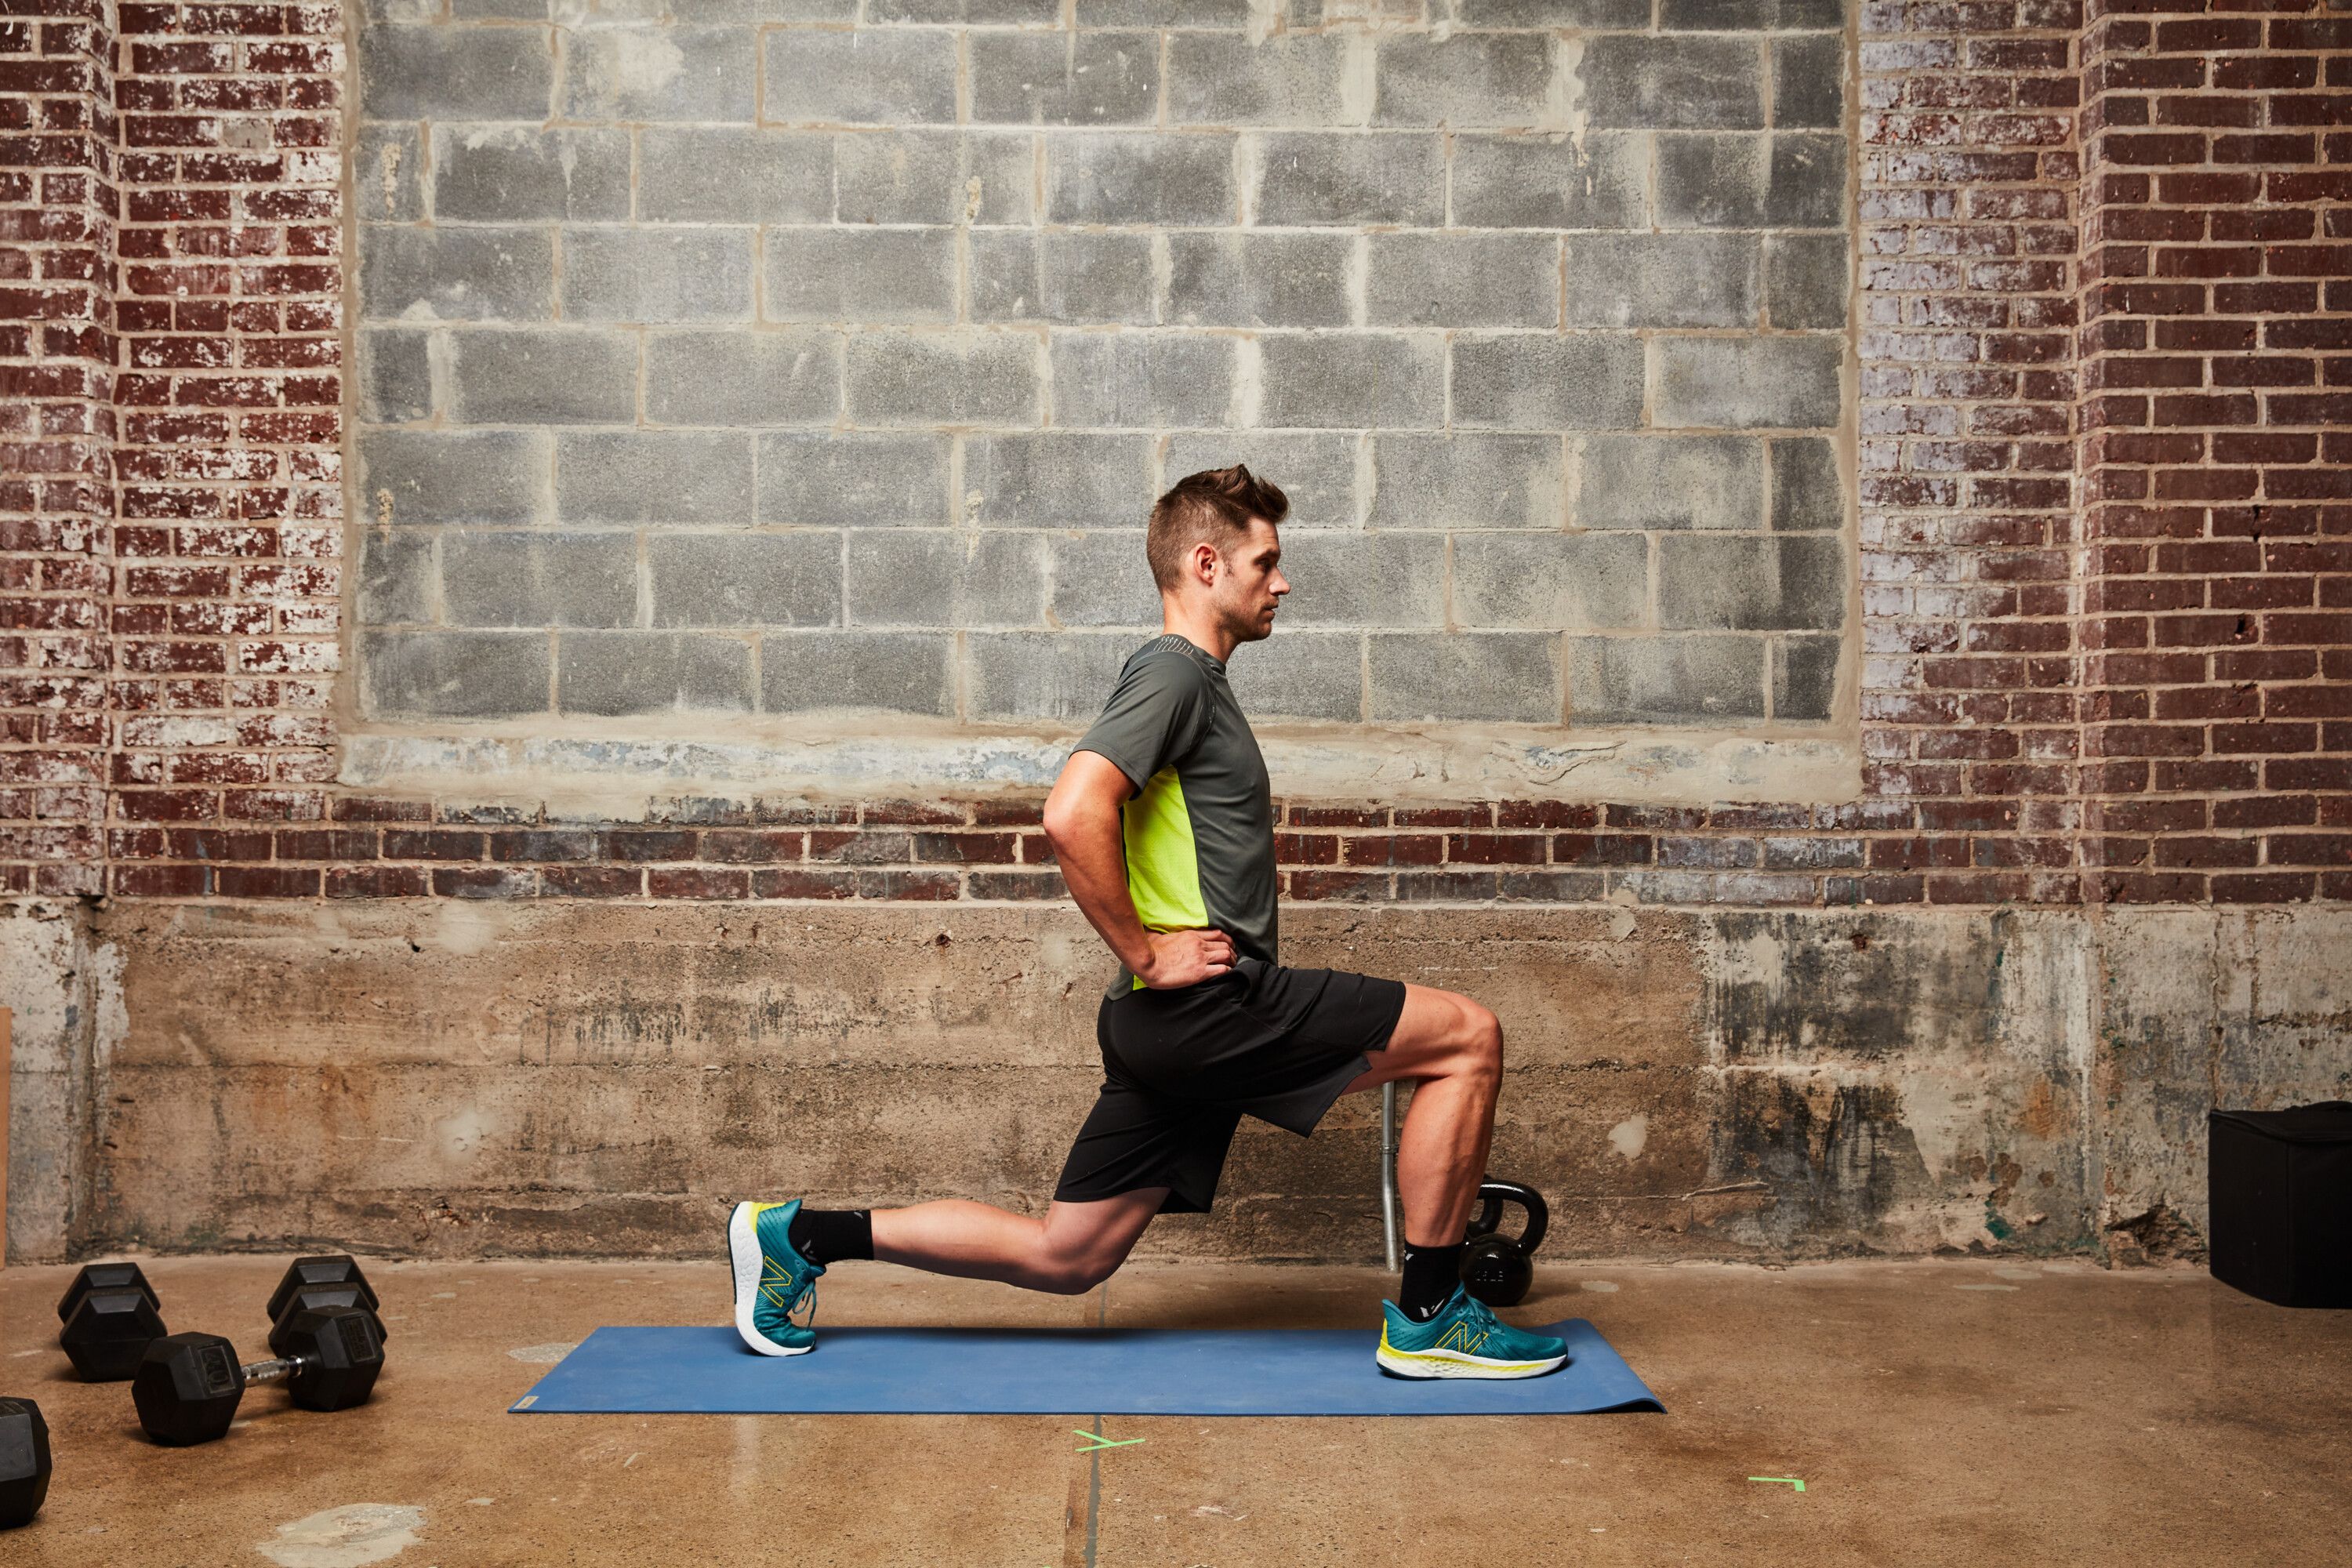 Power up your posture with these 4 exercises